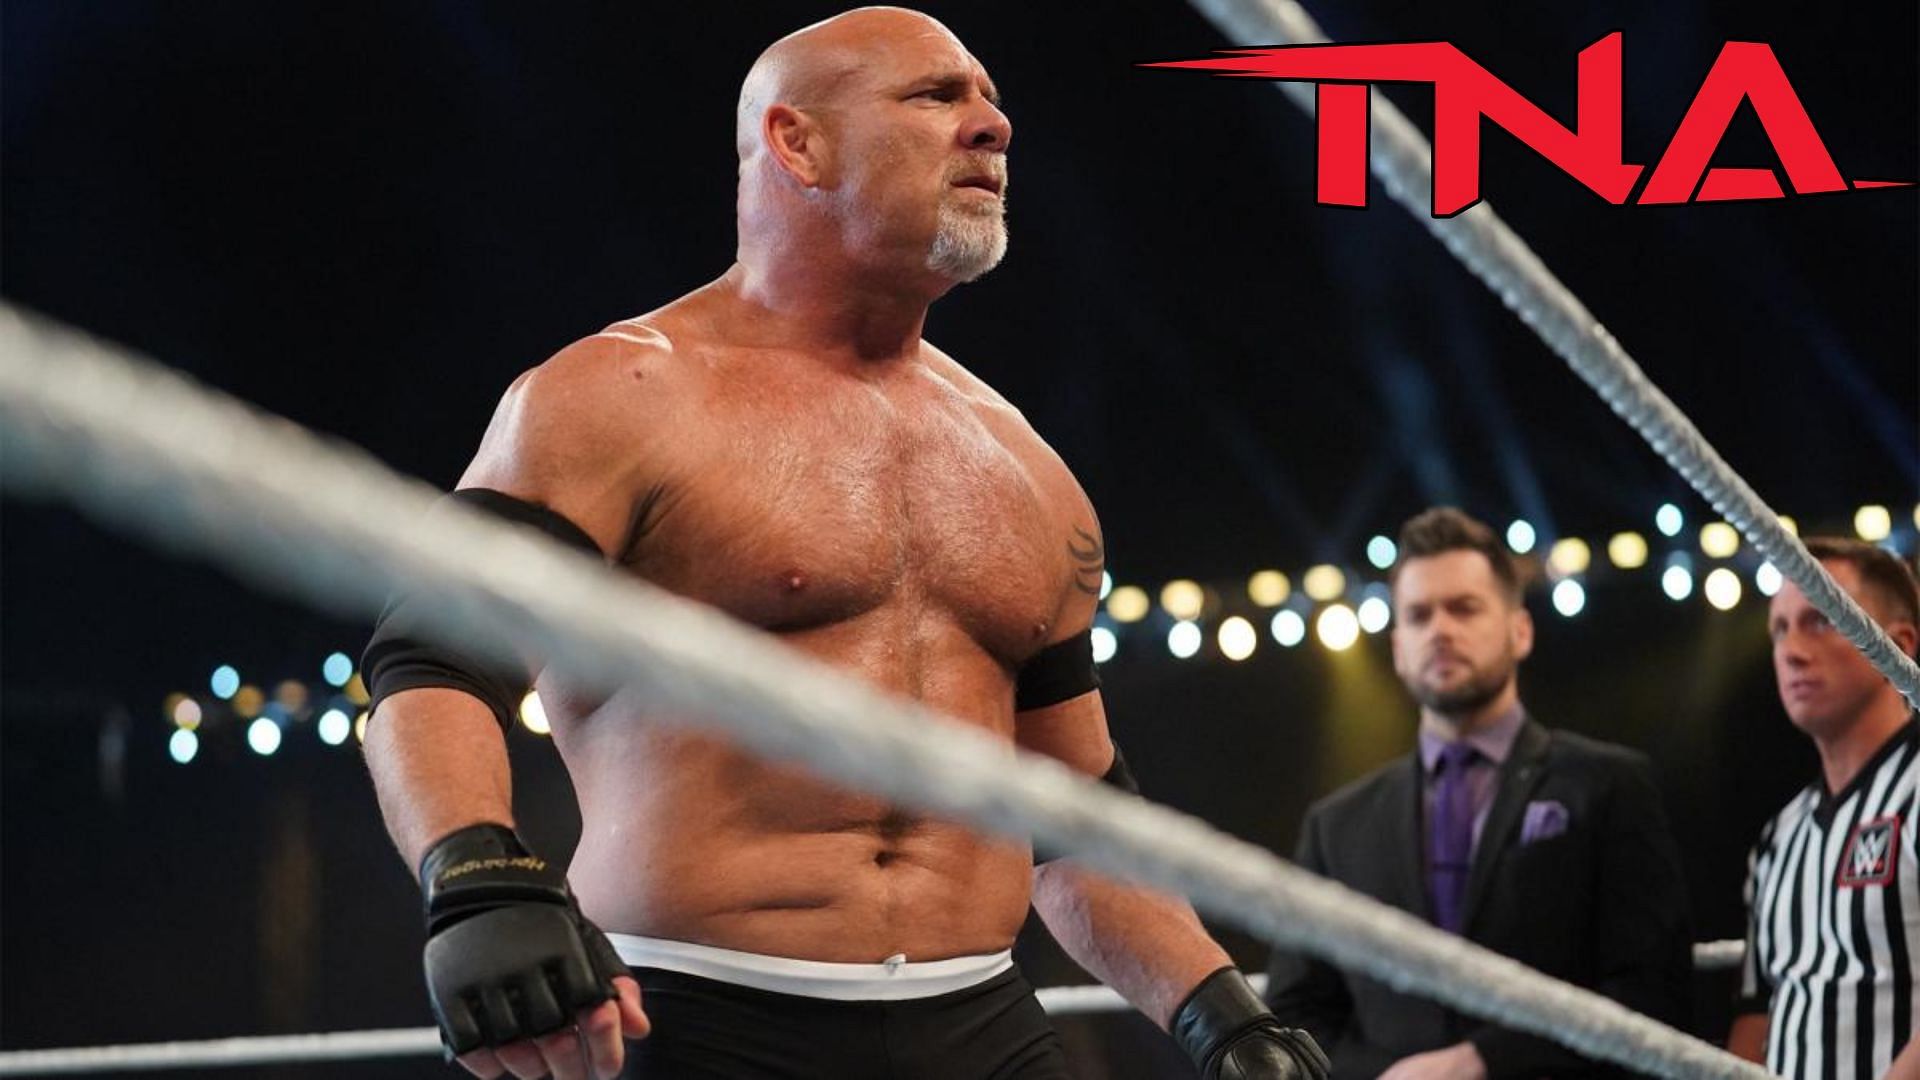 Would Goldberg have been a major star in TNA?